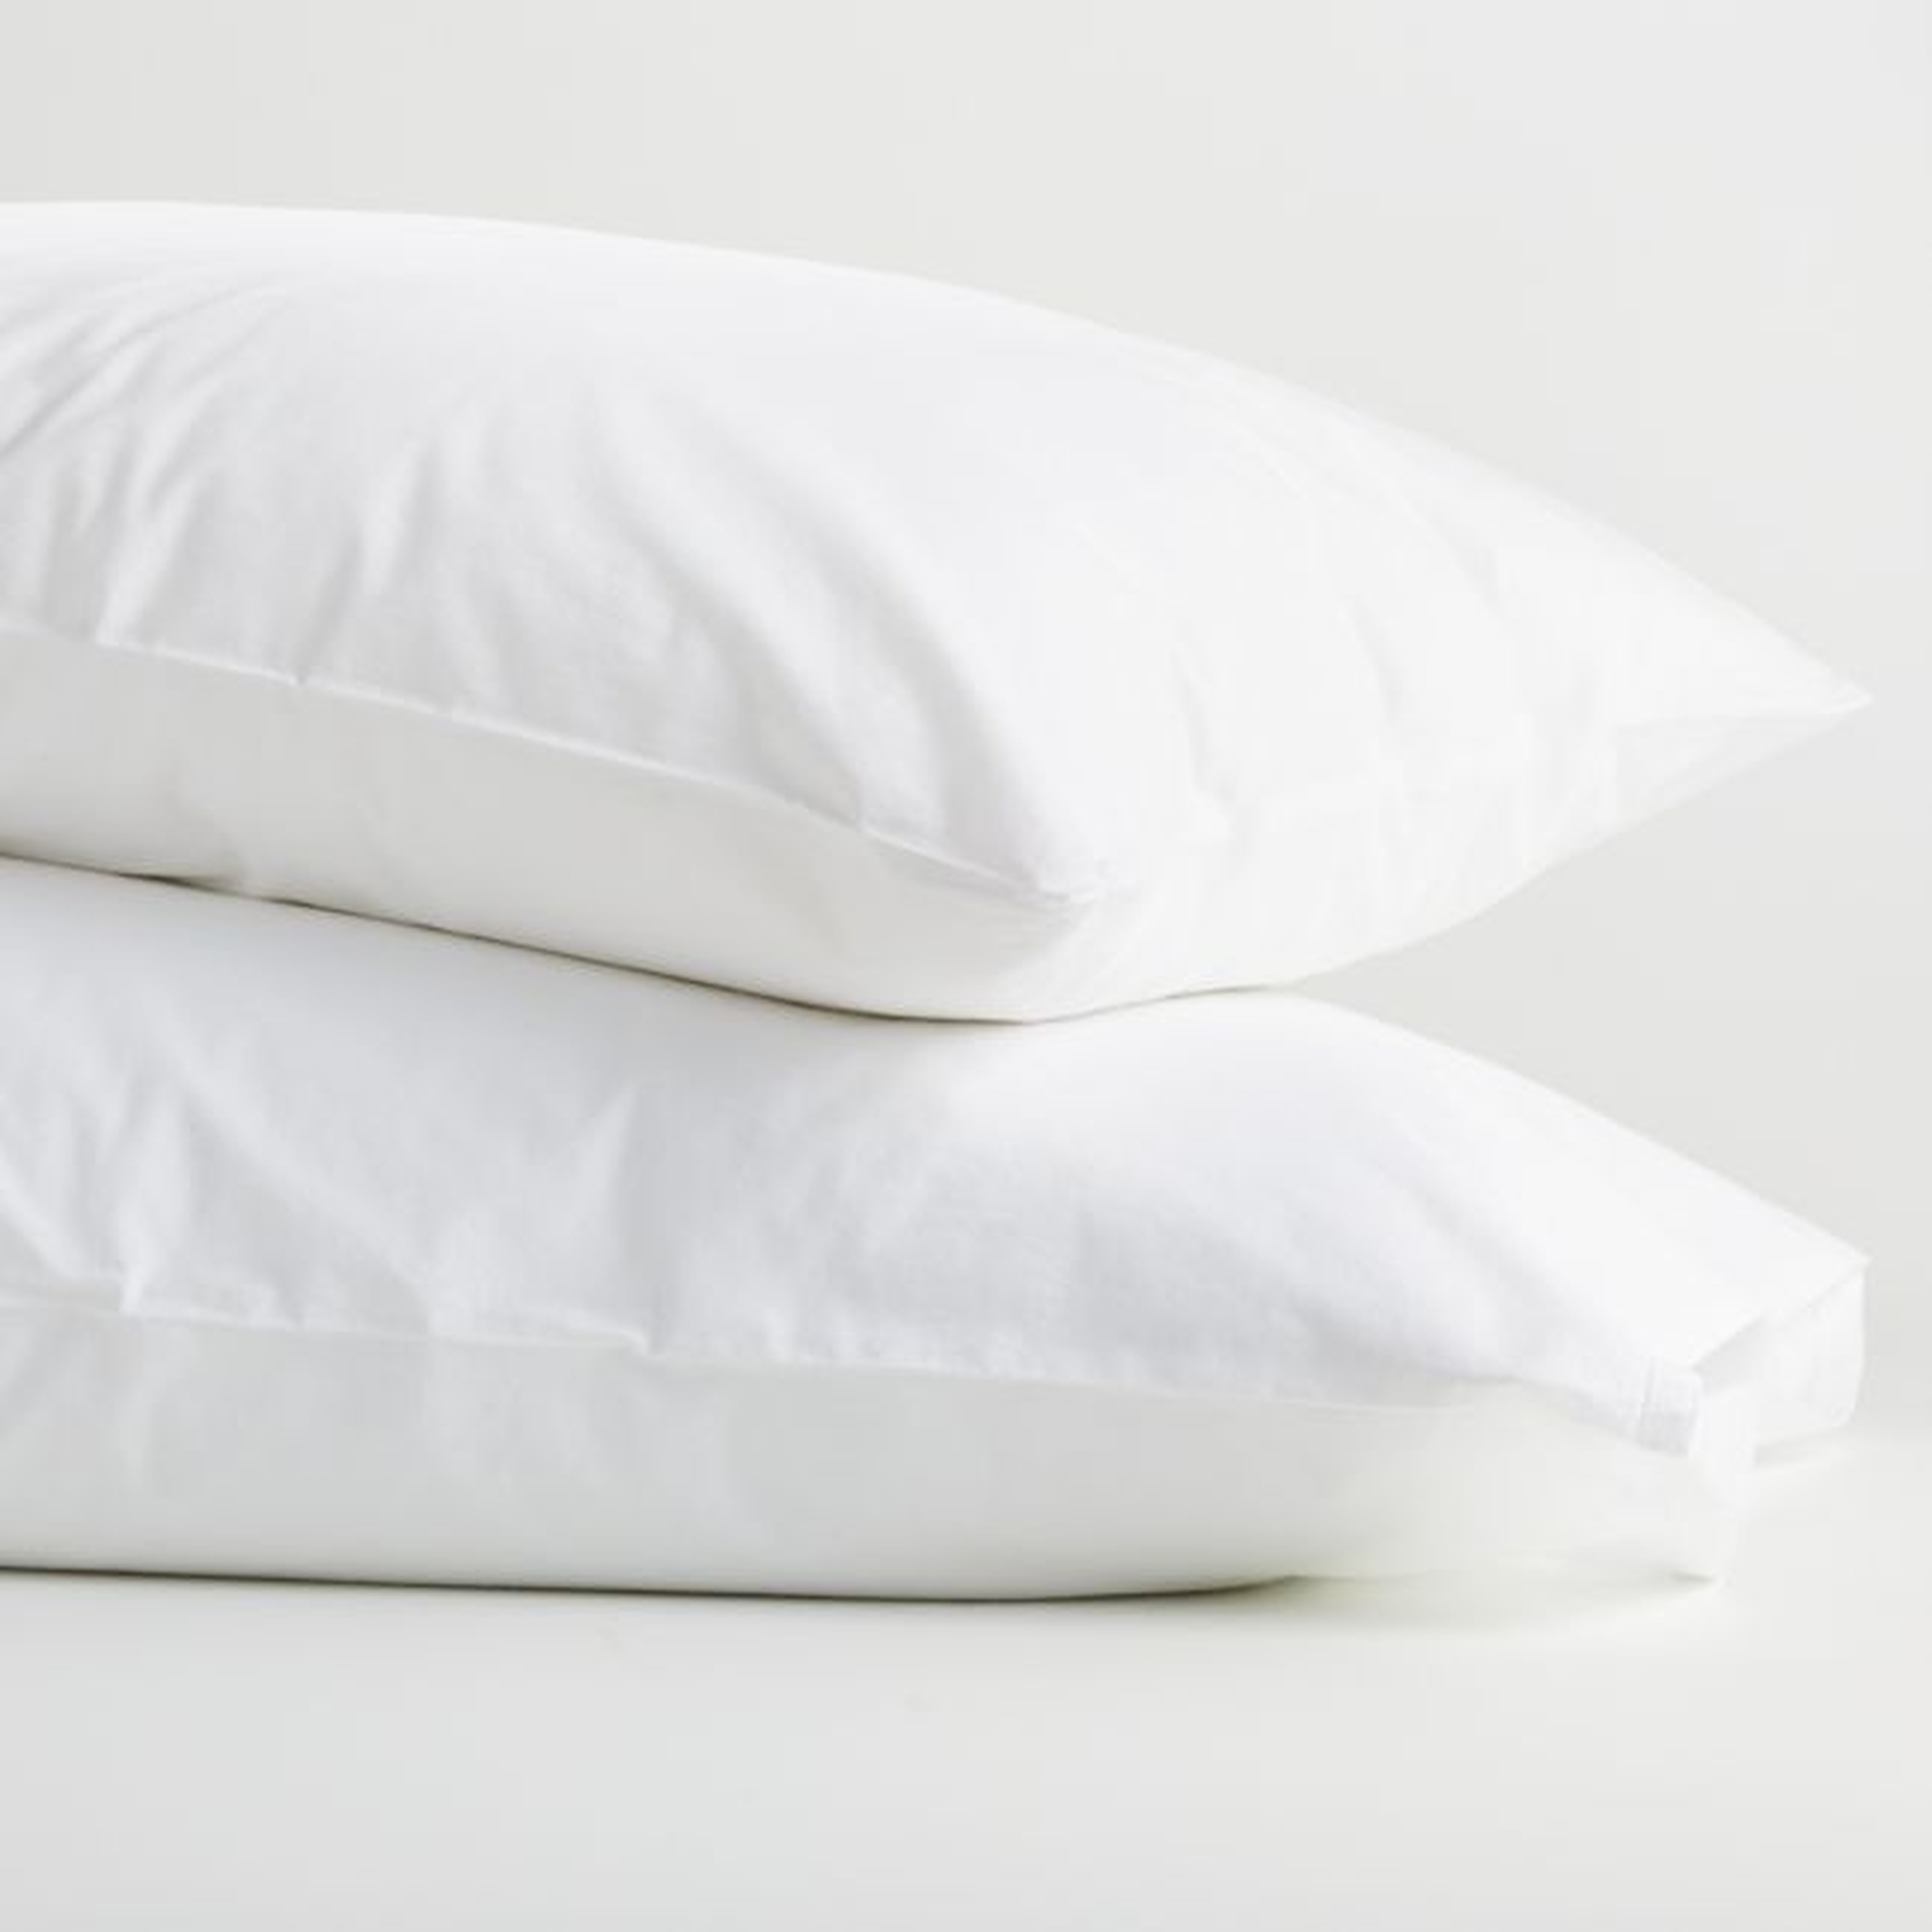 Crisp Cotton Percale White King Pillowcases, Set of 2 - Crate and Barrel